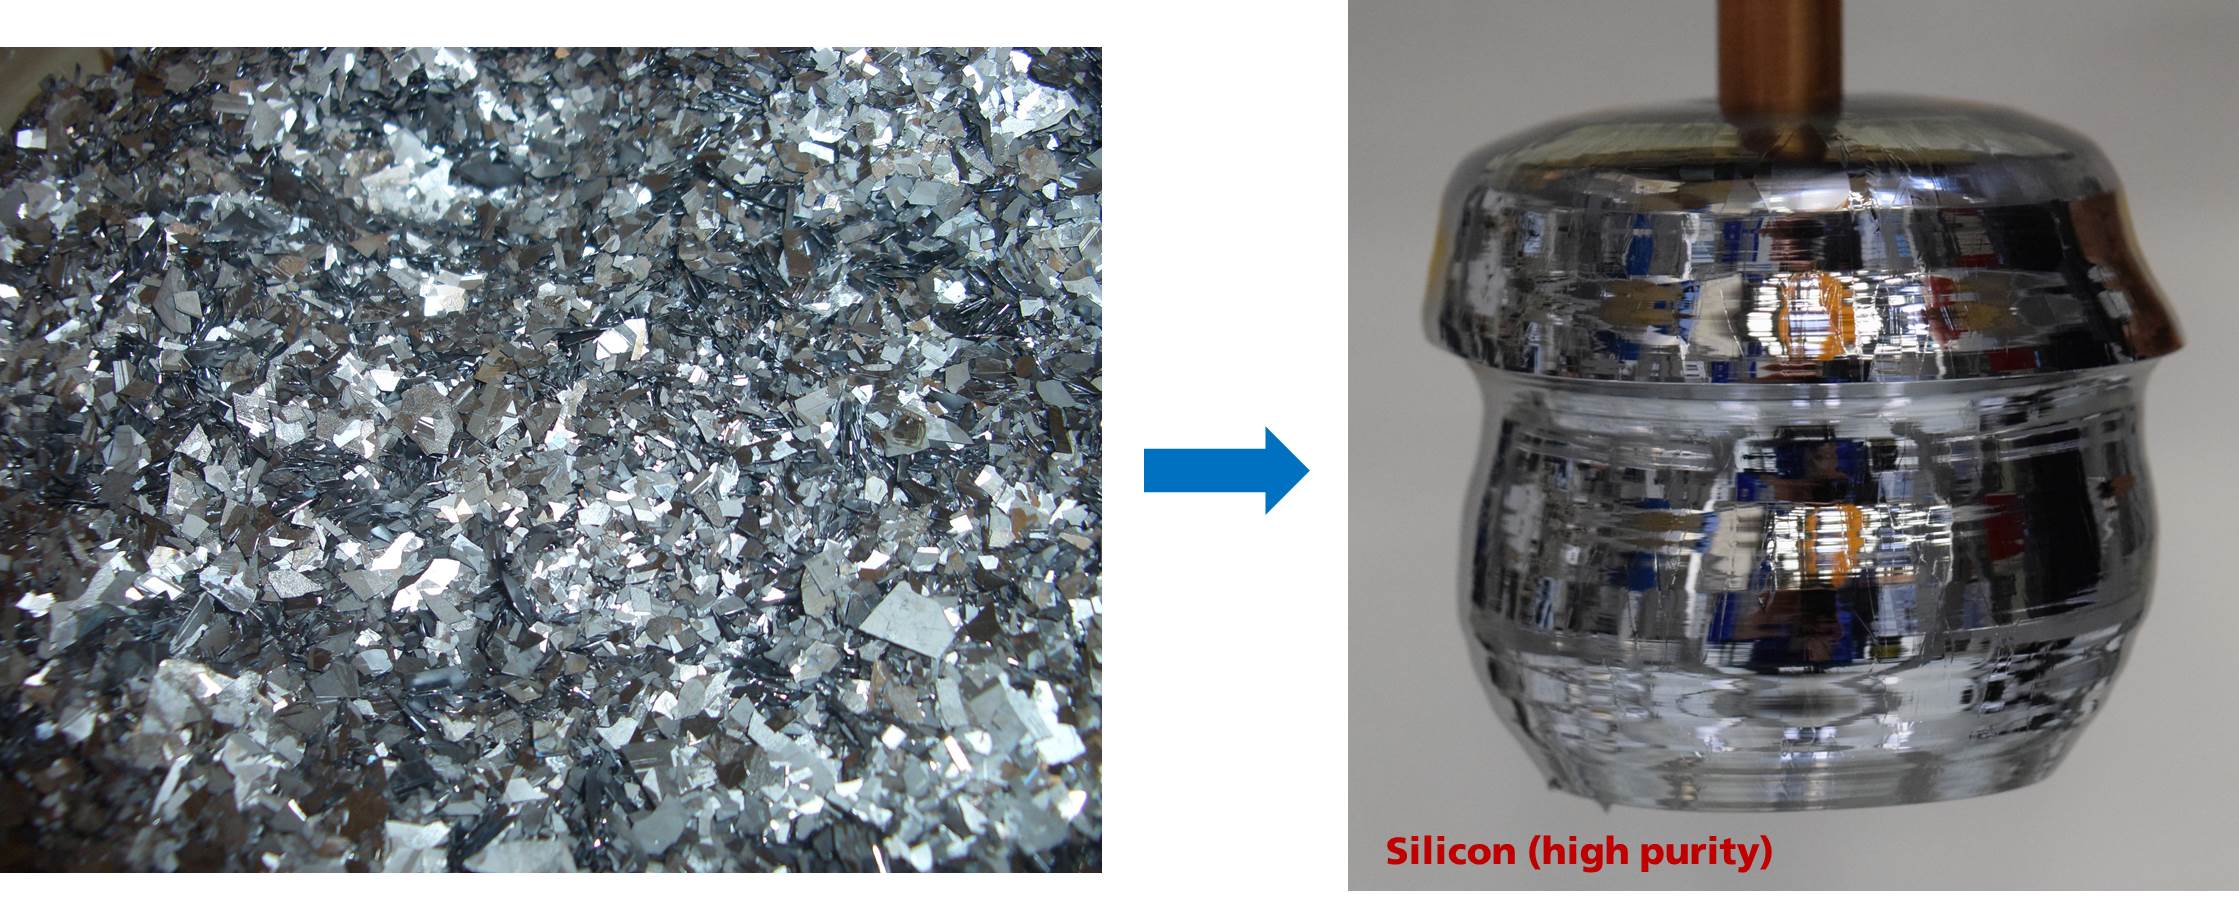 Etched silicon scrap (left) and recrystallized silicon block (right). 